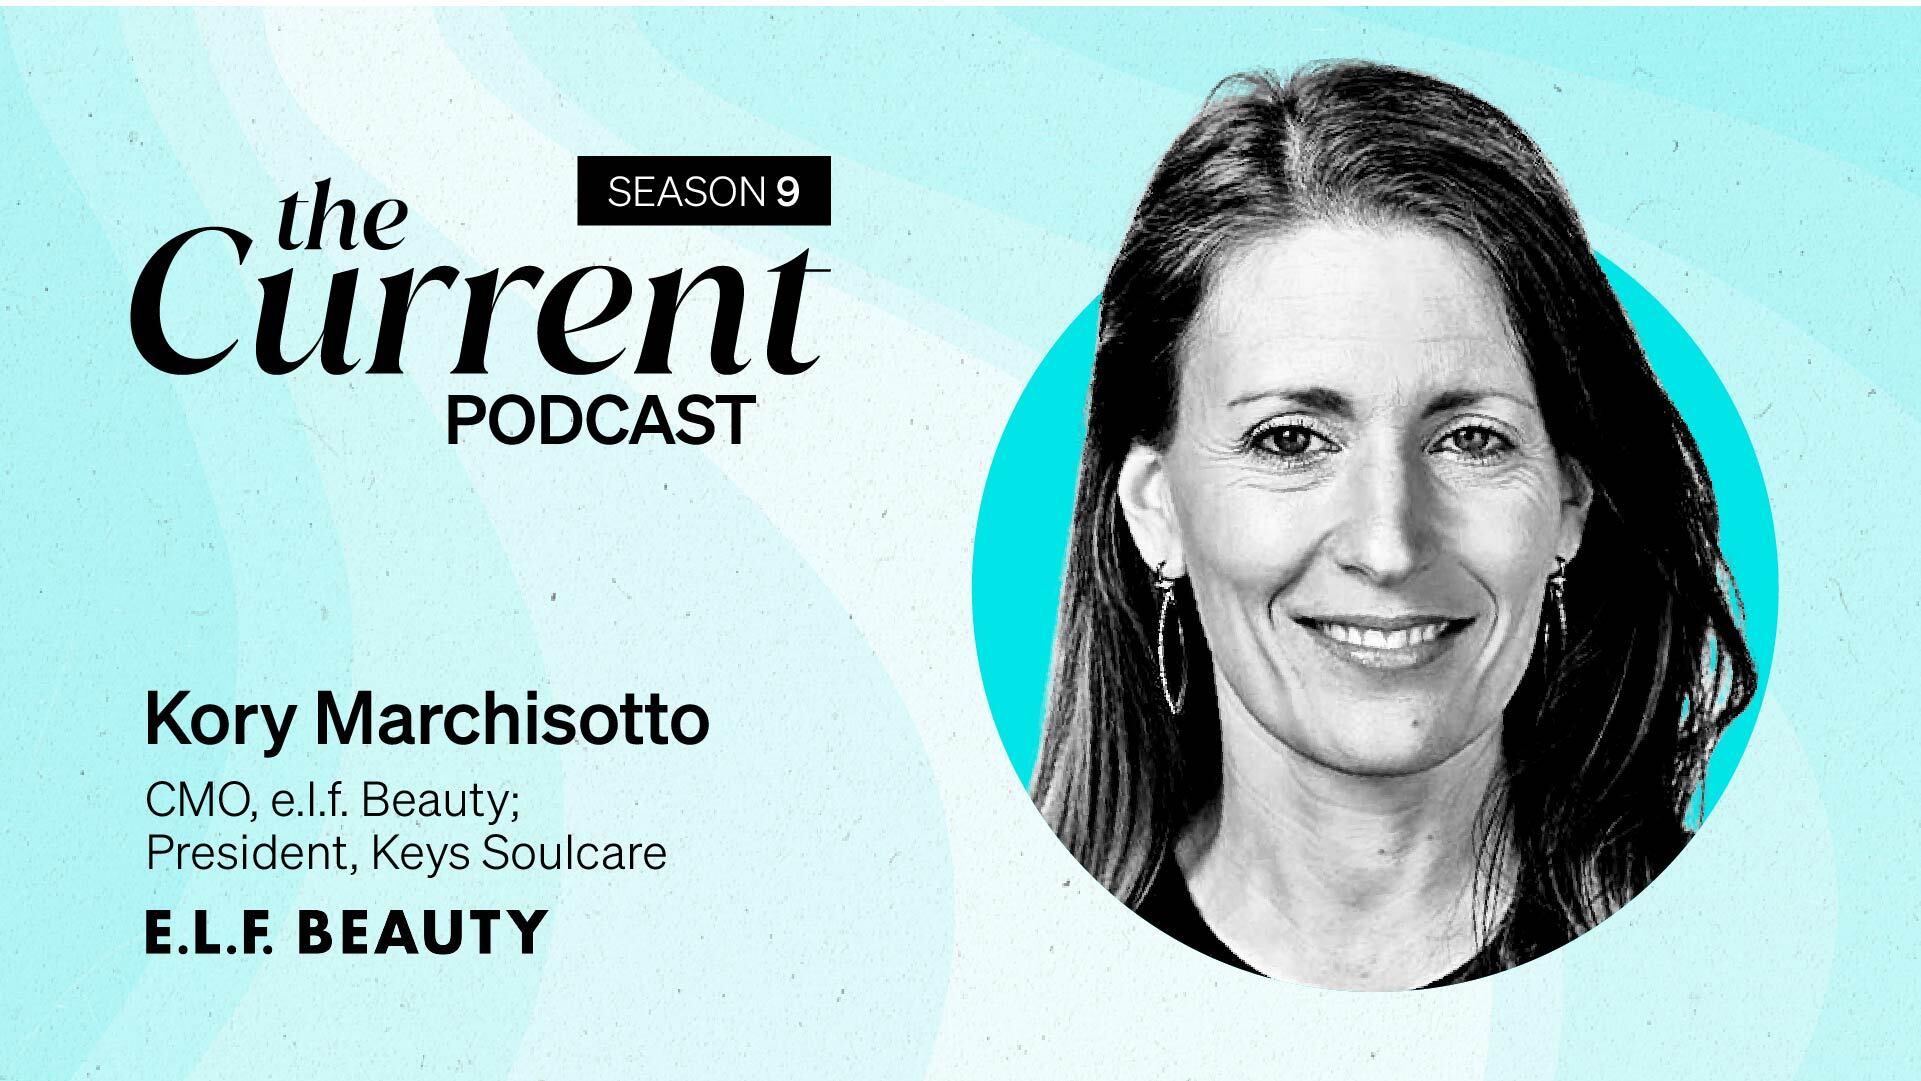 The Current Podcast, Season 9: Kory Marchisotto, CMO, e.l.f. Beauty, President, Keys Soulcare